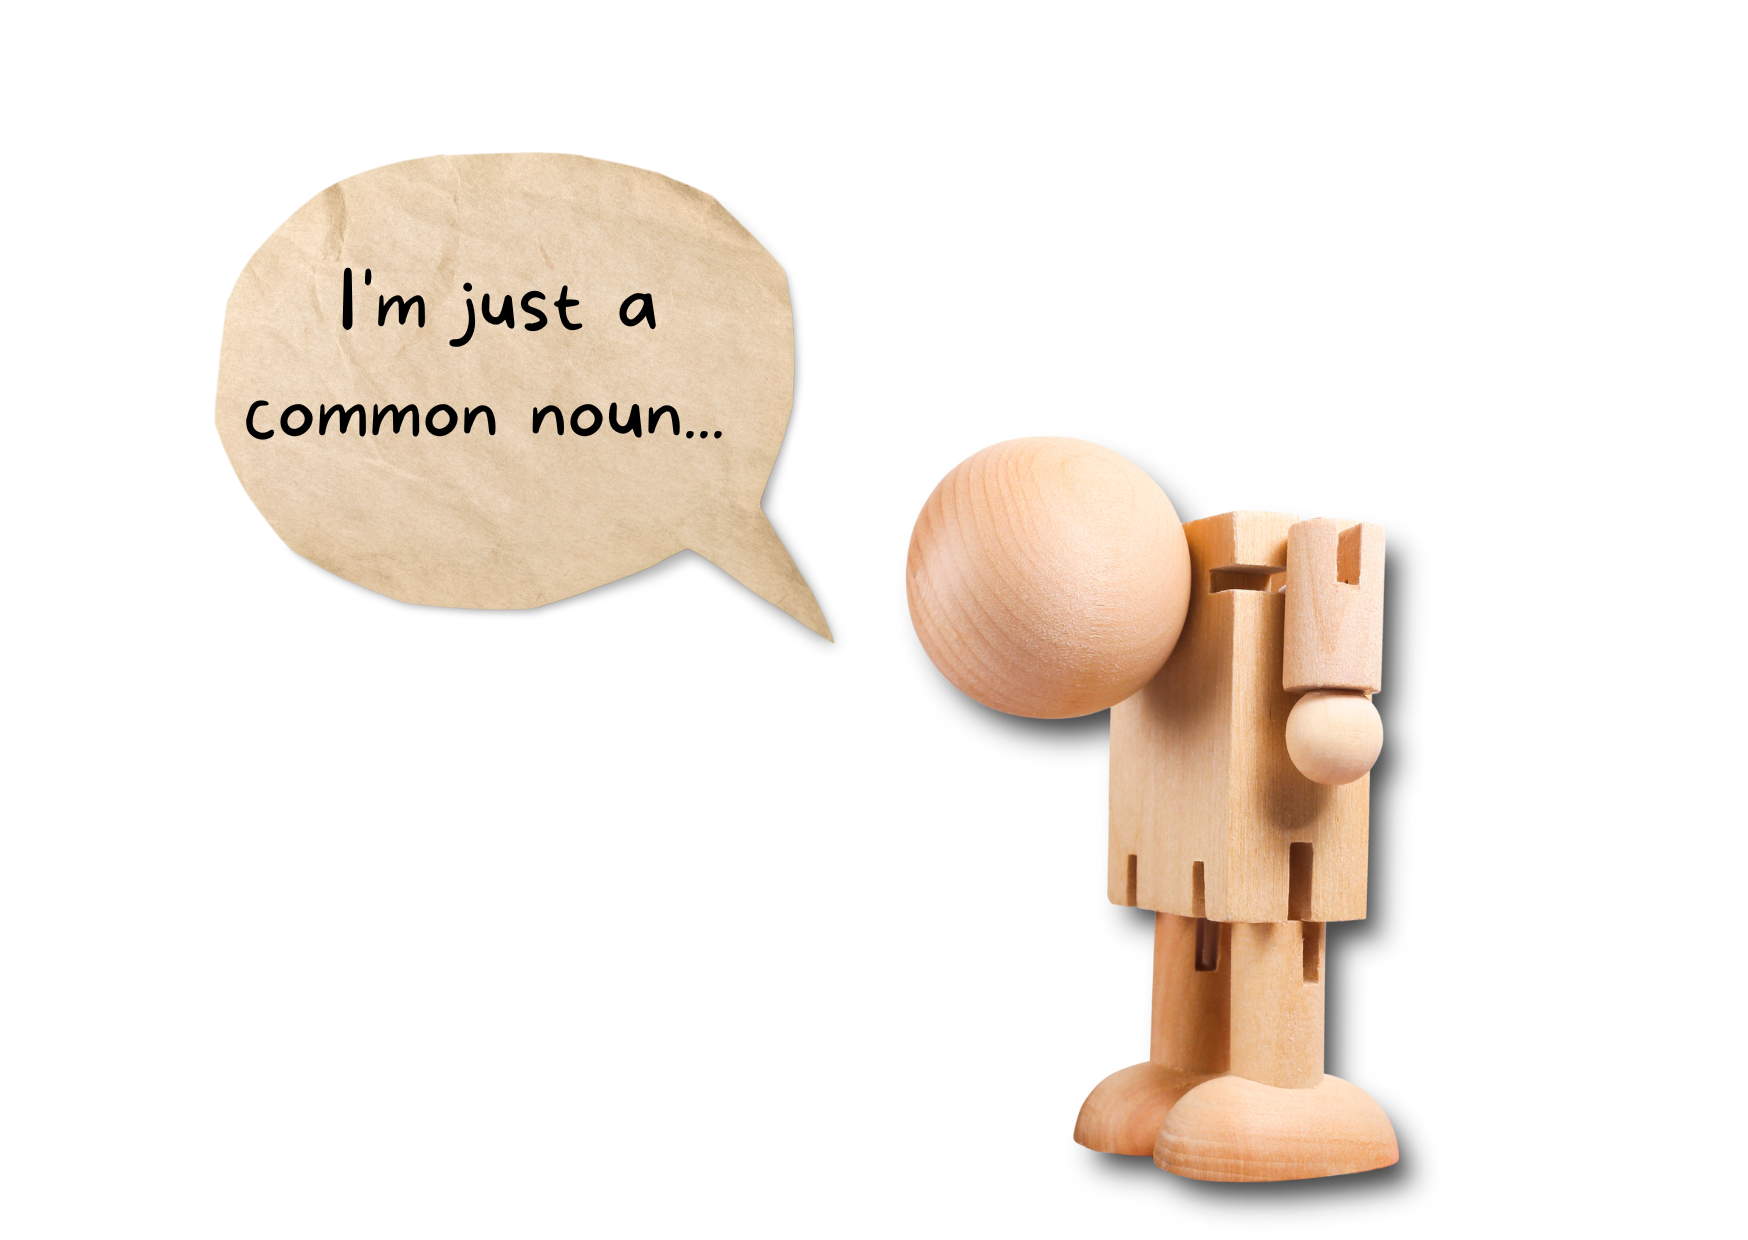 a picture of a wooden figurine with his dead down and a speech bubble with the text: "I am just a common noun"